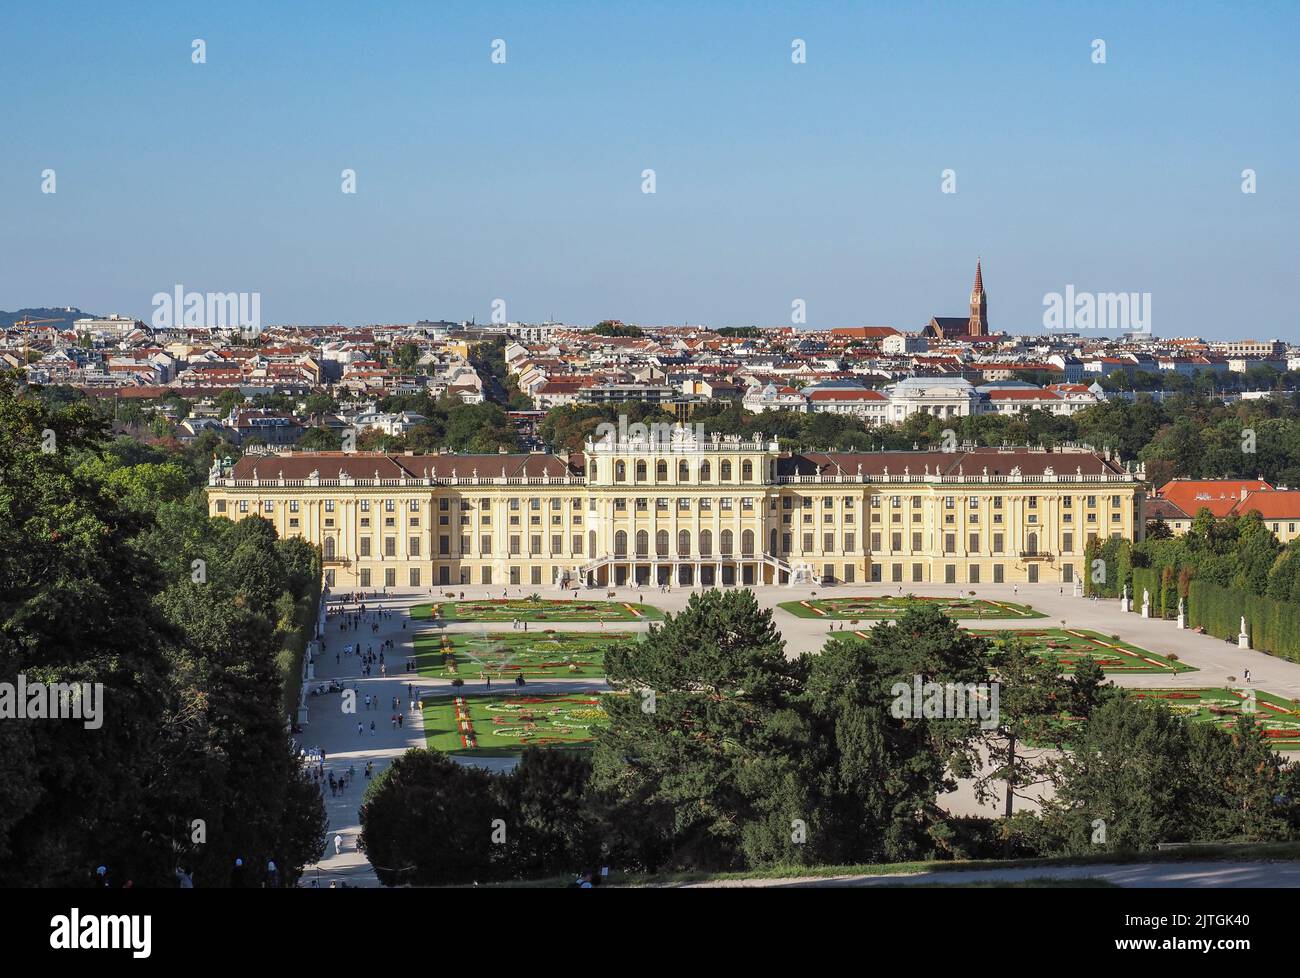 Schonbrunn Palace or Schloss Schonbrunn is the imperial summer residence in Vienna, Austria. Schonbrunn Palace is one of the main tourist attractions Stock Photo